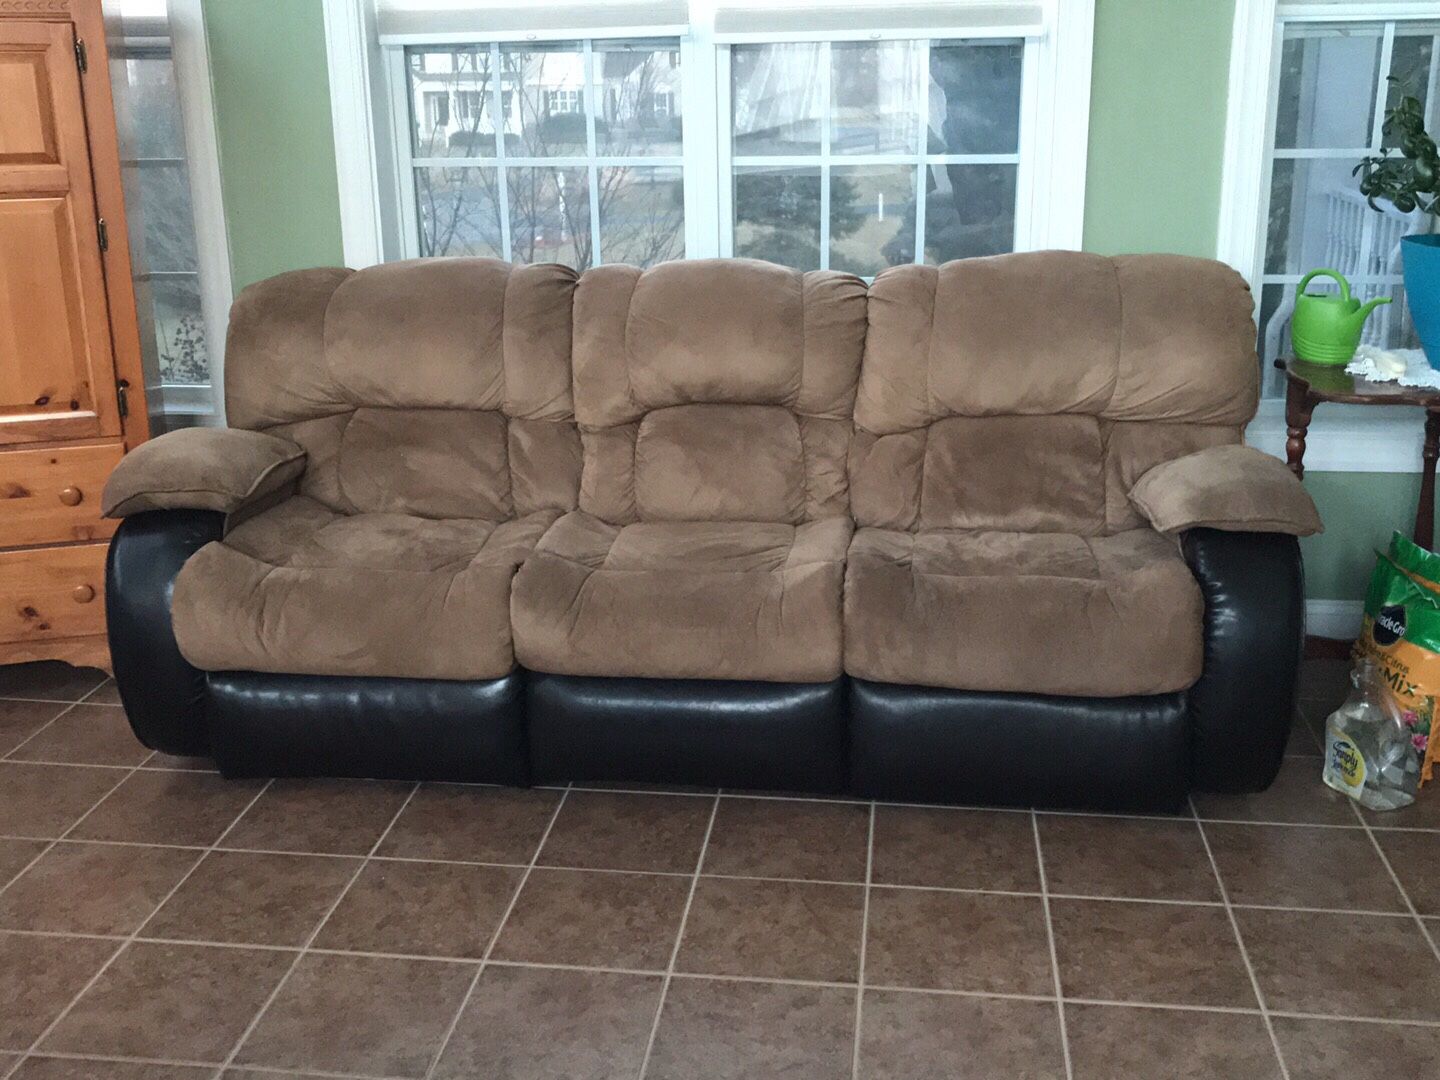 Faux suede and leather couch/loveseat combo